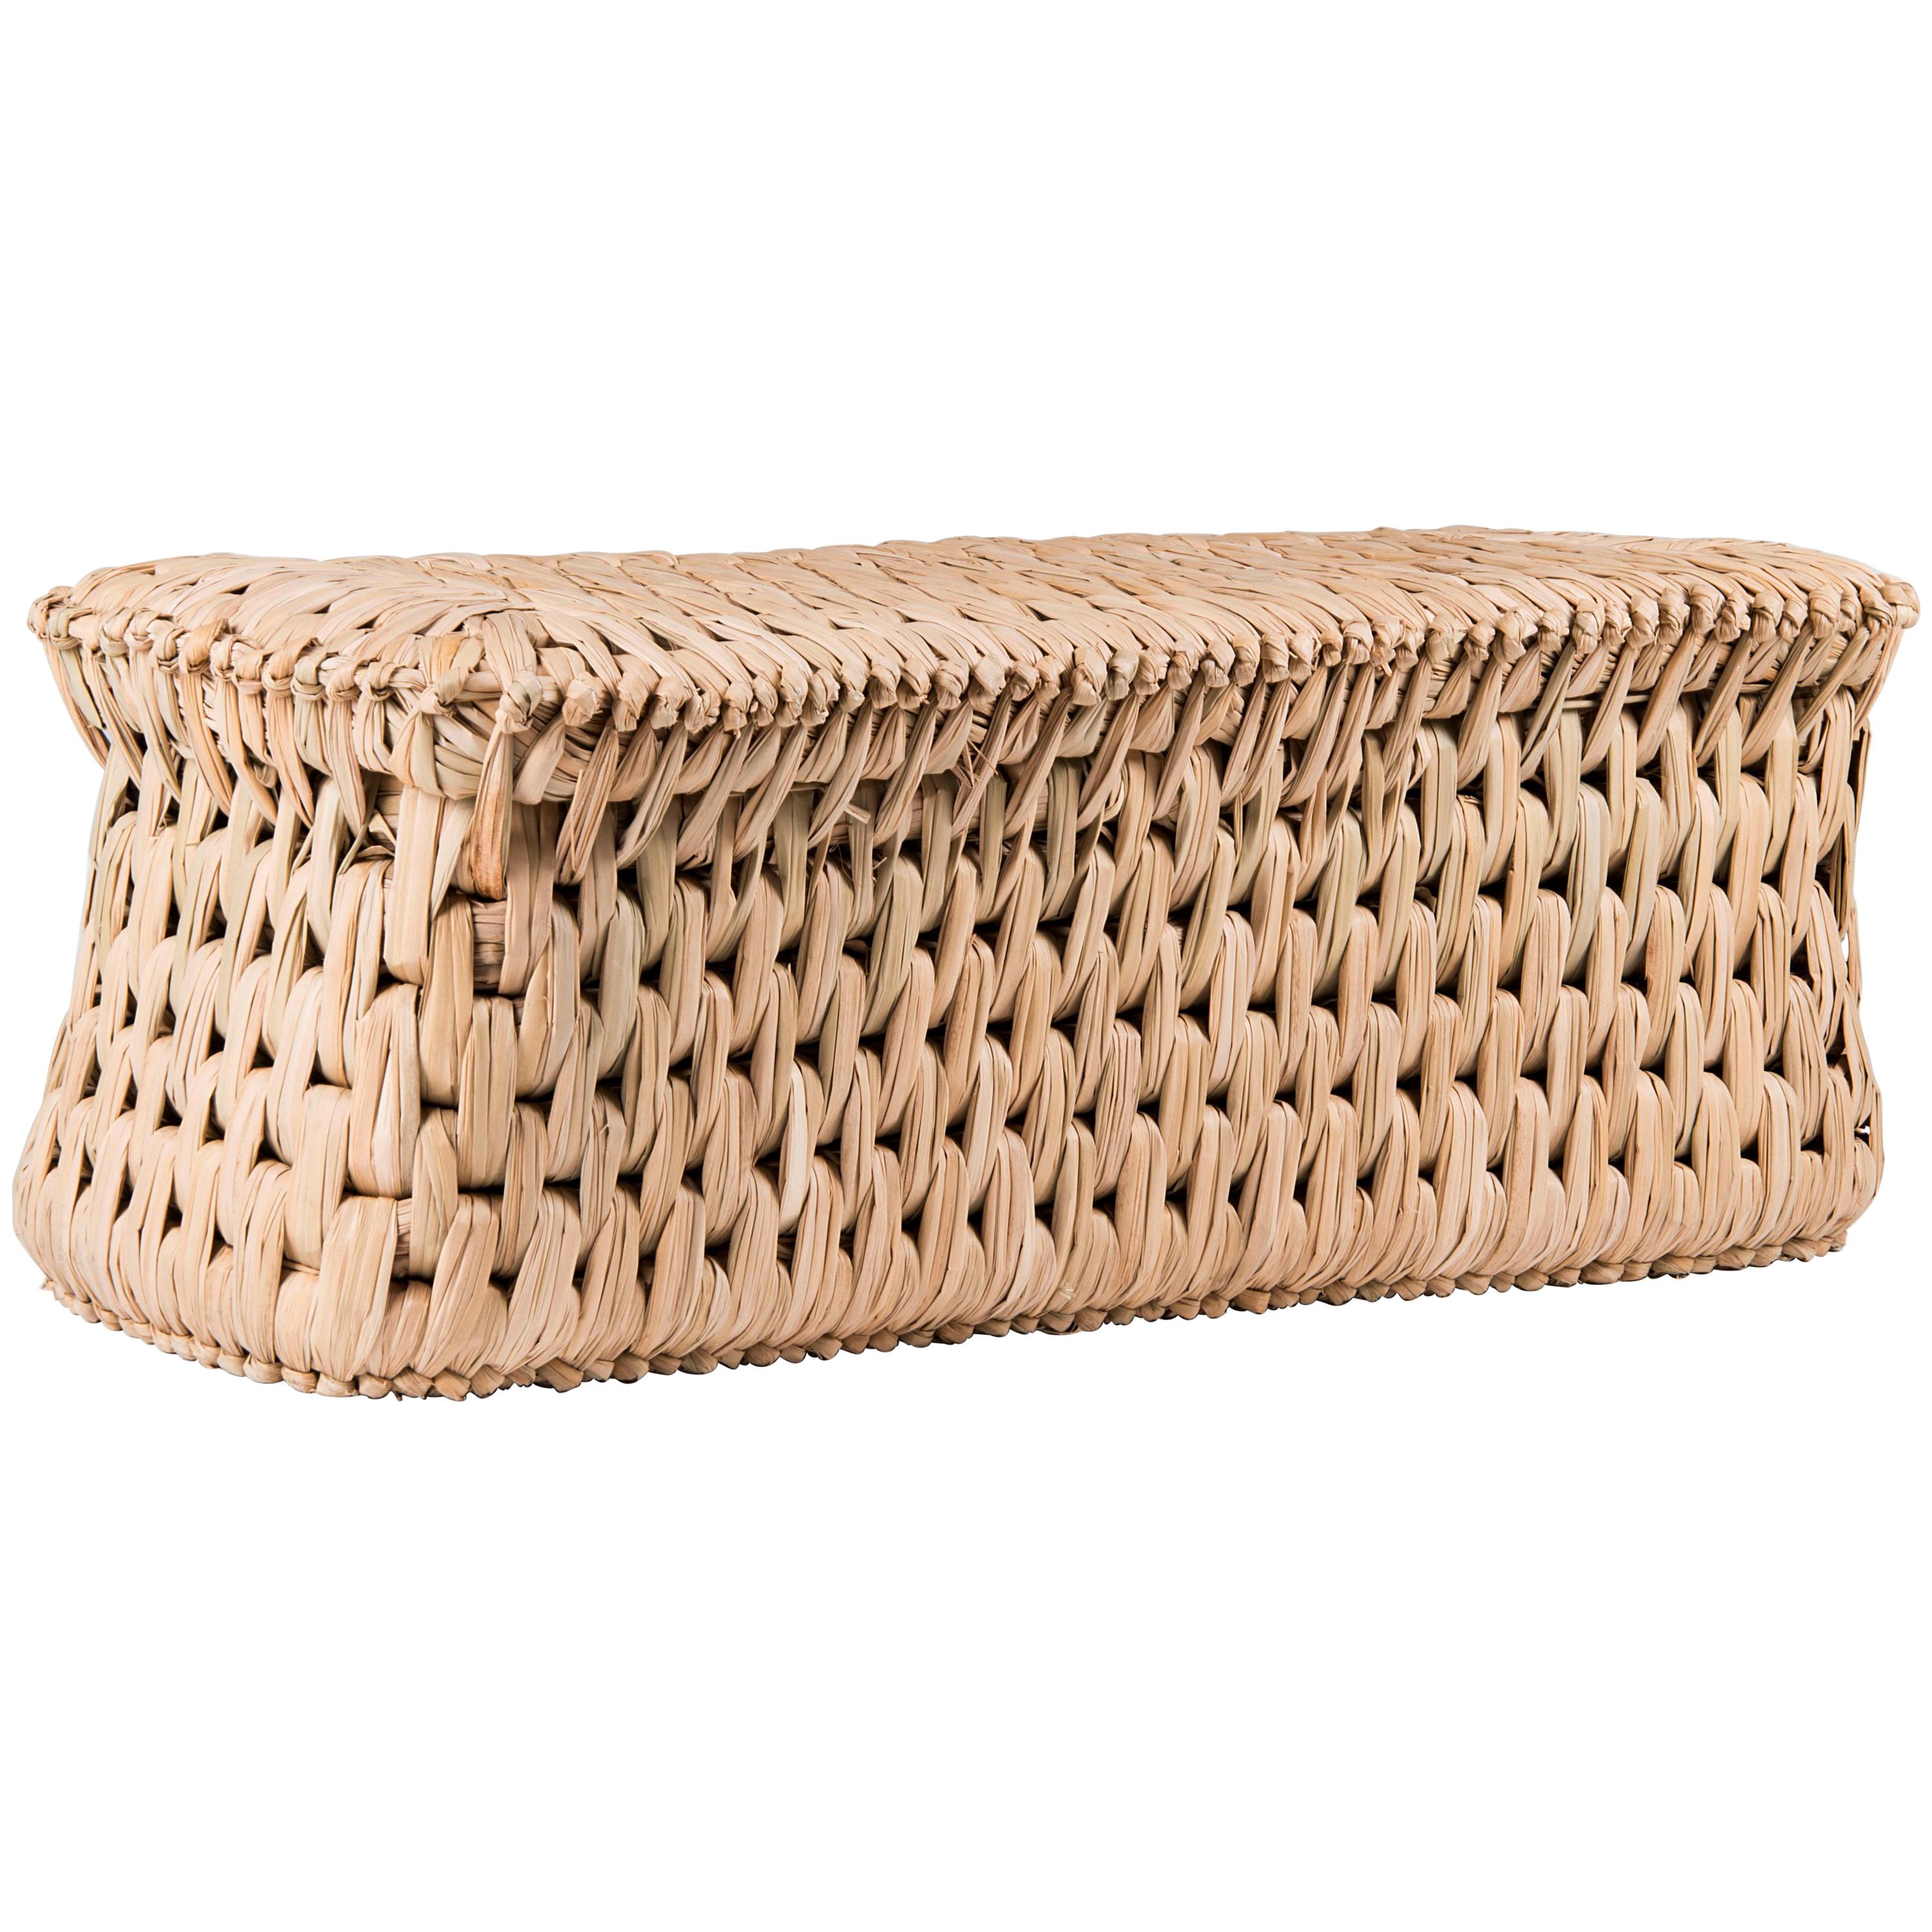 Woven Tule 'Icpalli' Bench made in Mexico from LUTECA